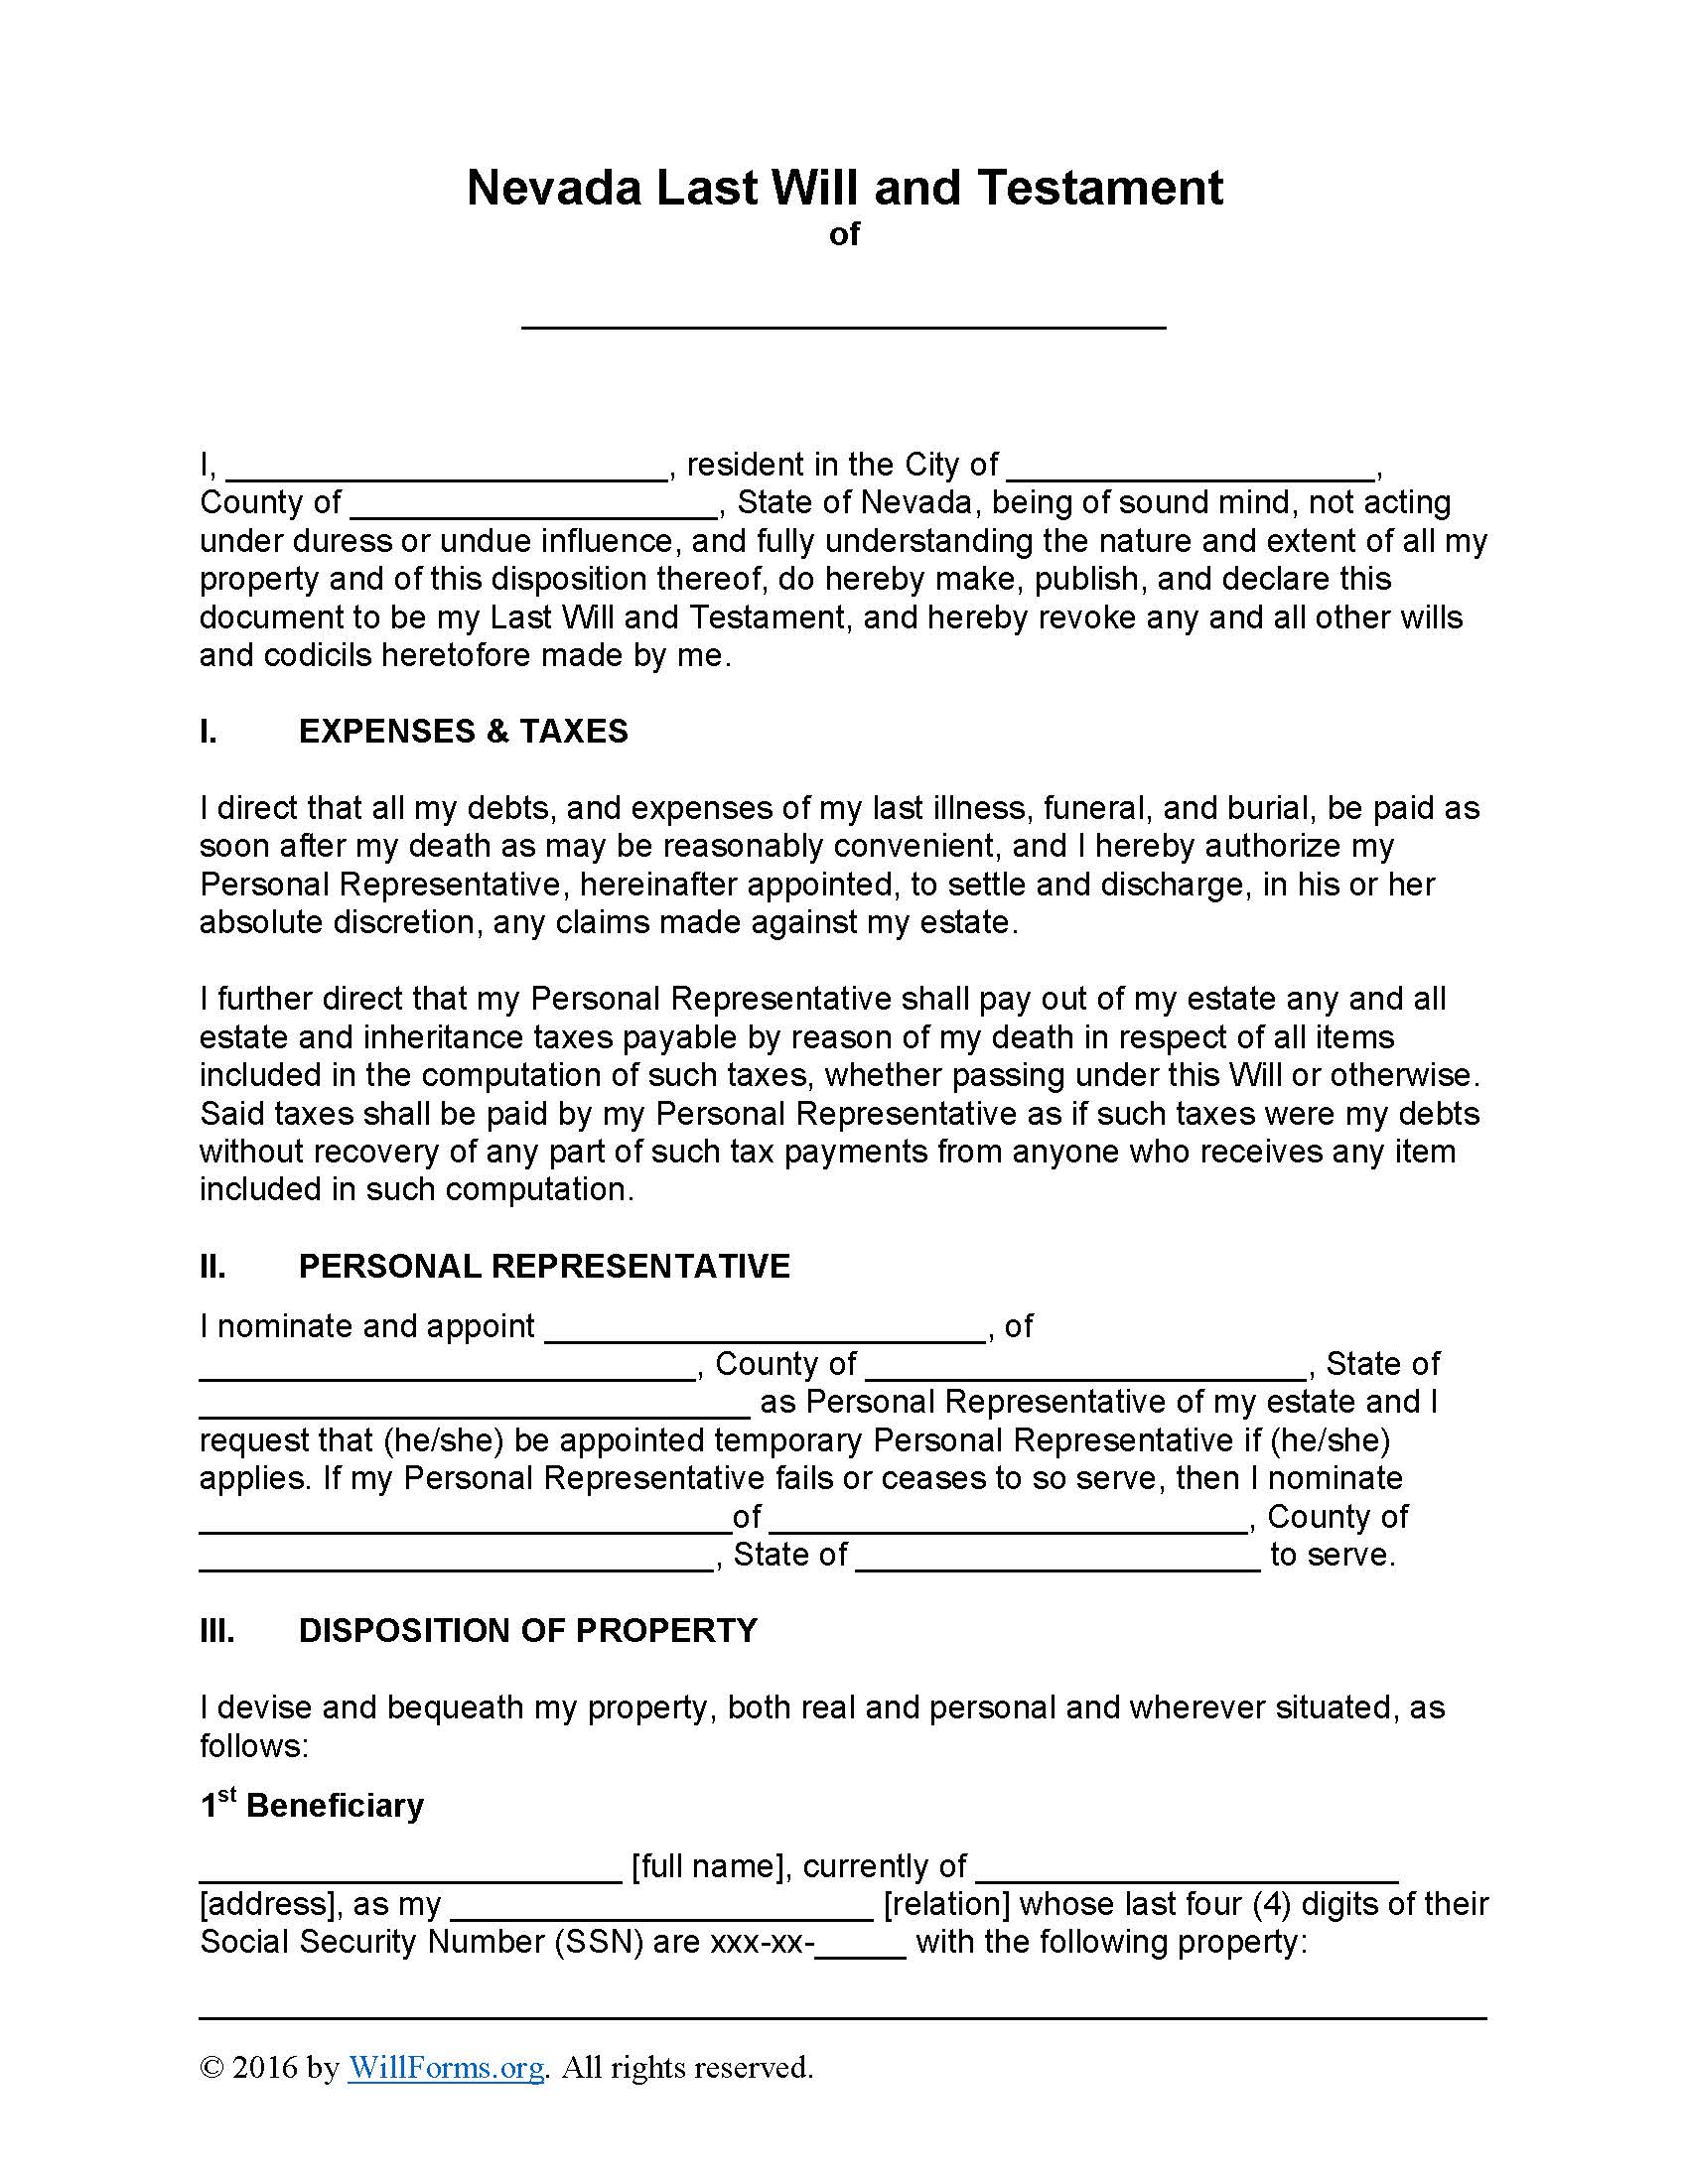 Nevada Last Will and Testament Form